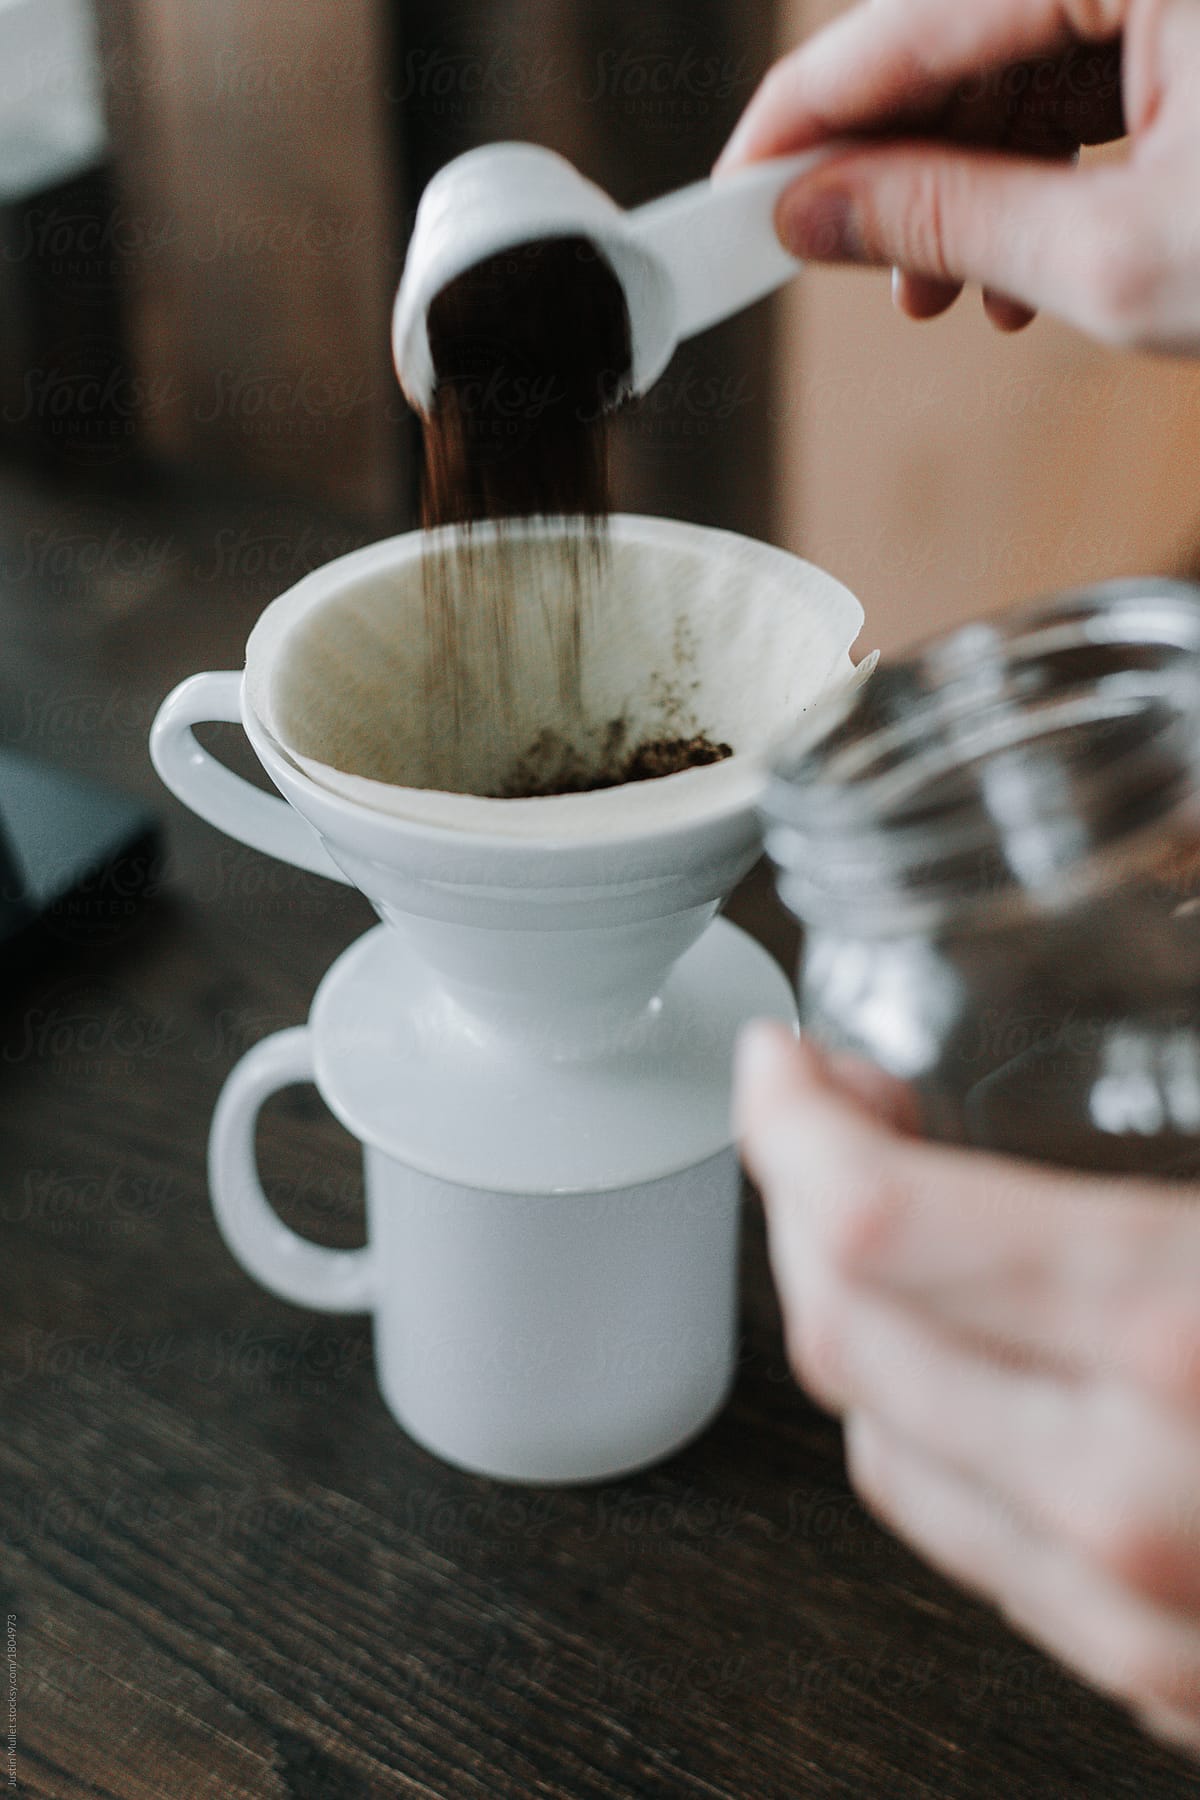 Pour ground coffee into a pour over cone and filter